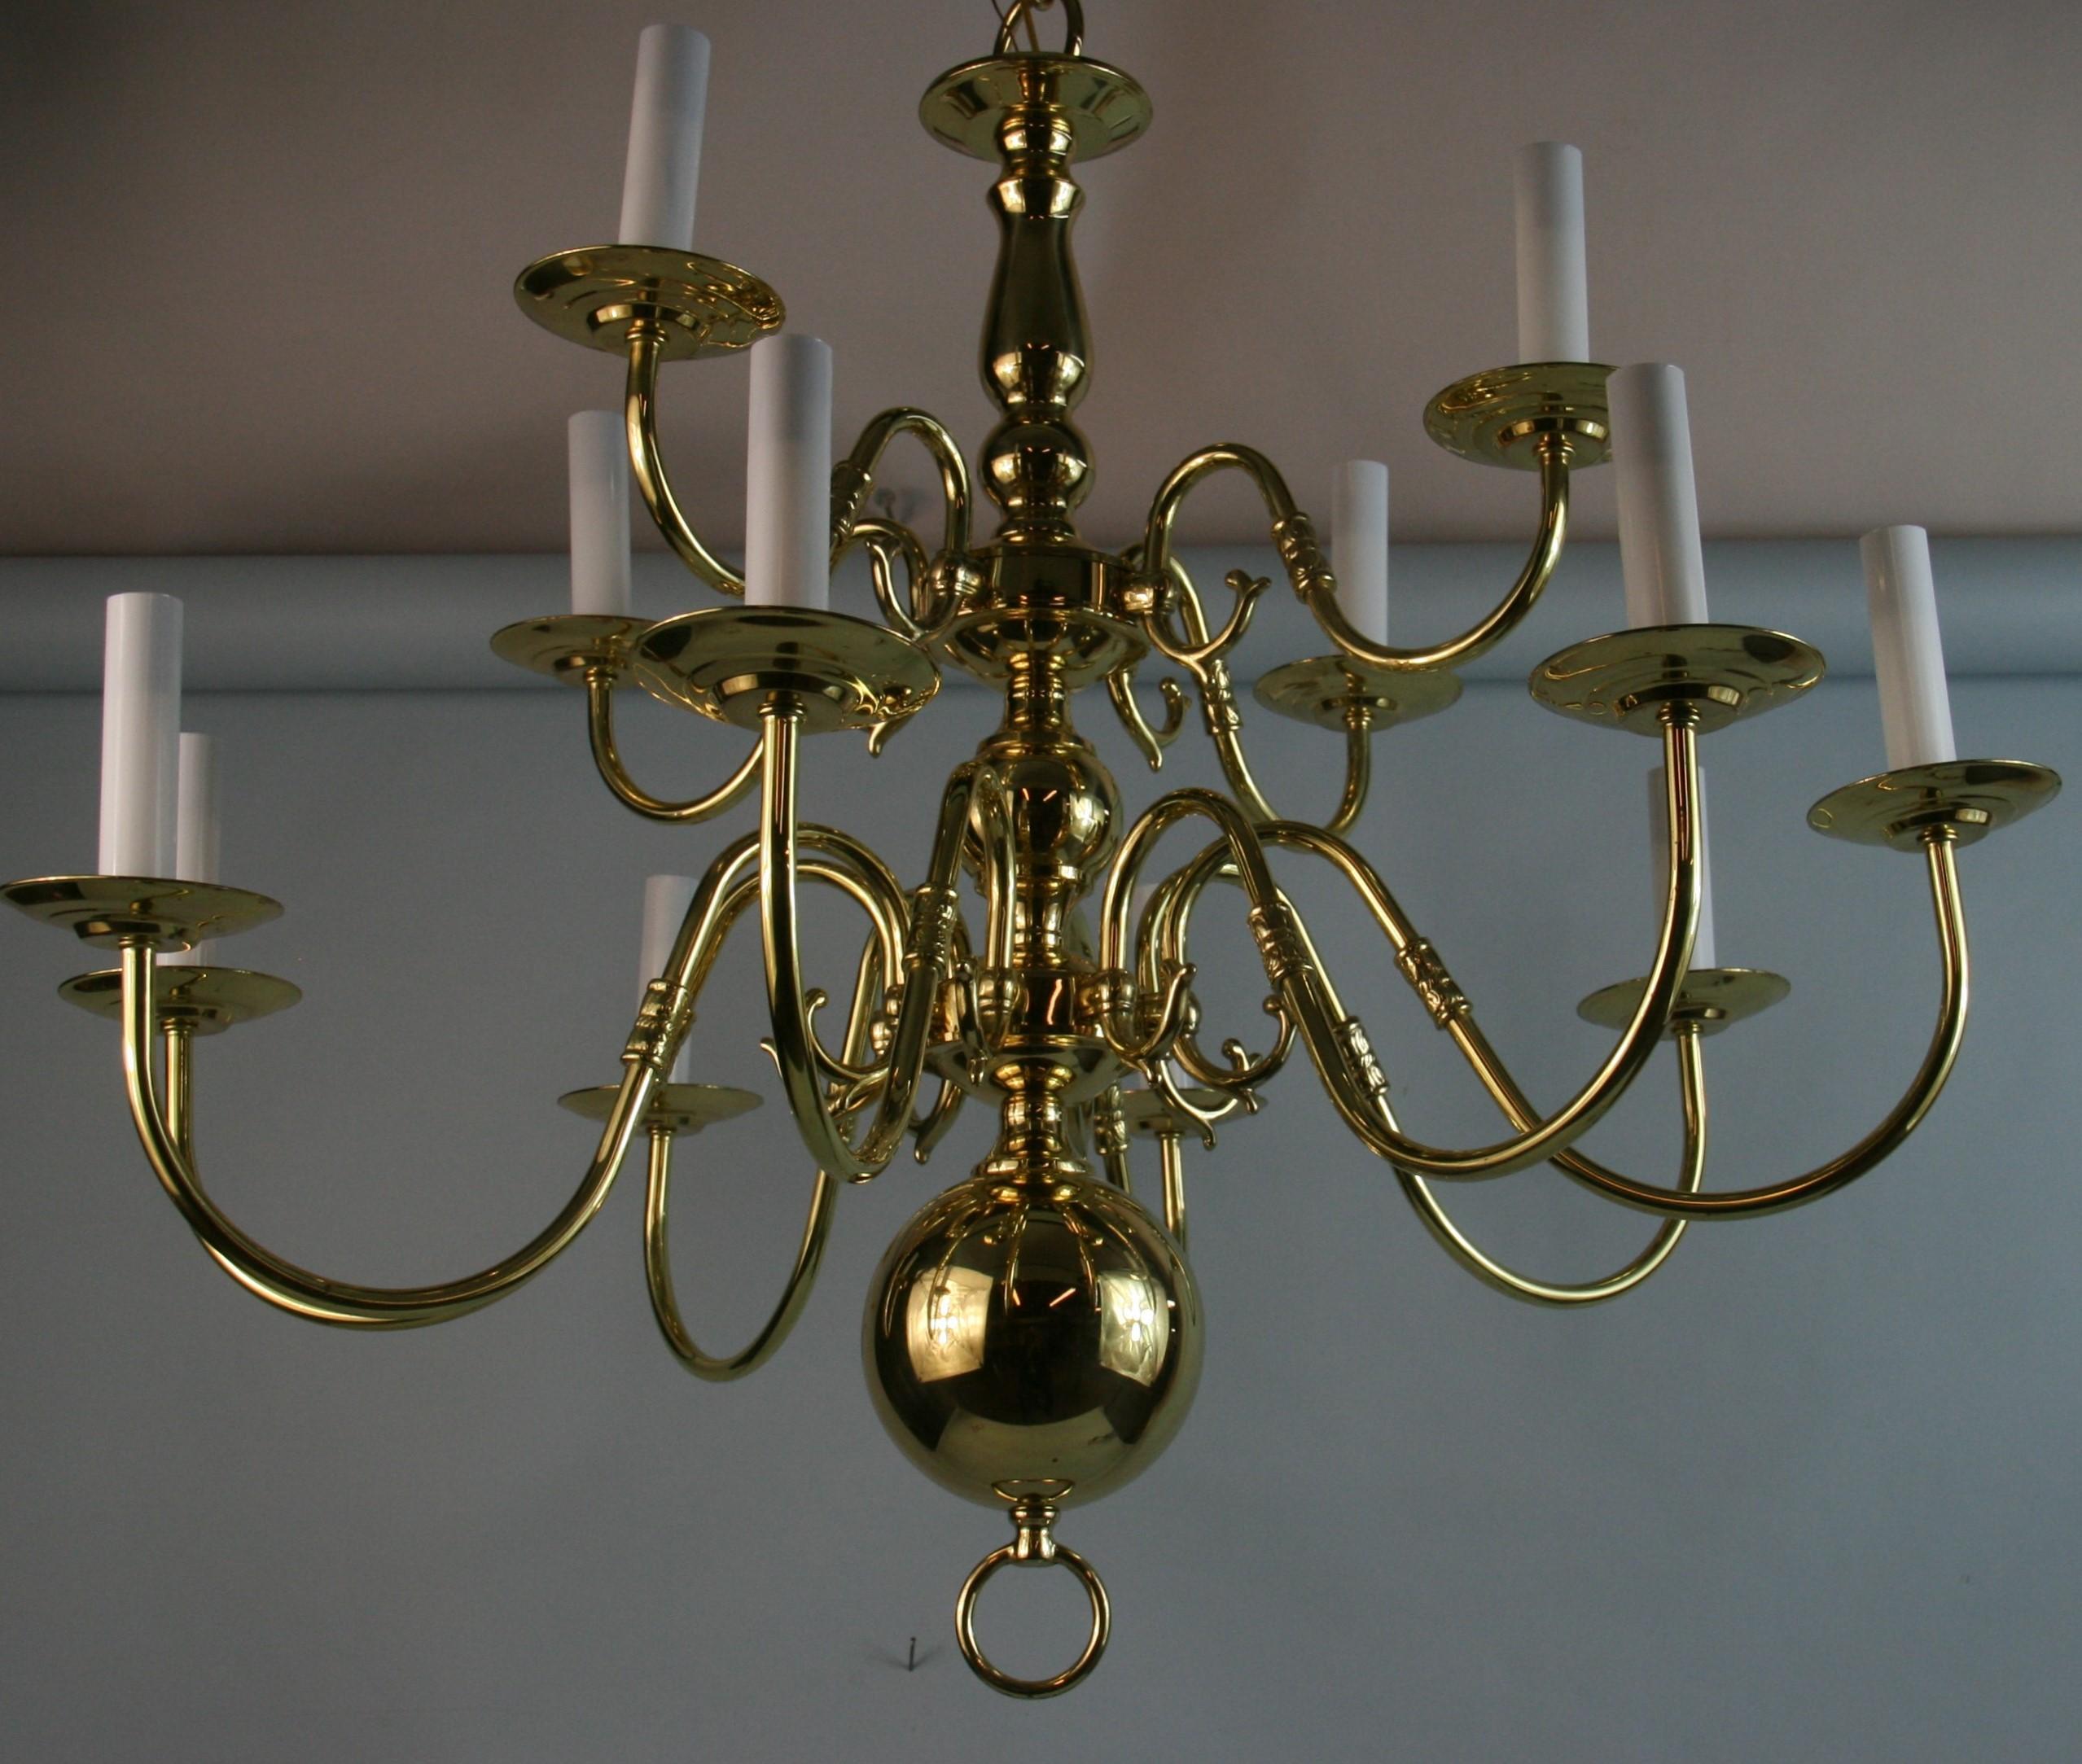 Modern Flemish Style 12 Light Brass Chandelier In Good Condition For Sale In Douglas Manor, NY